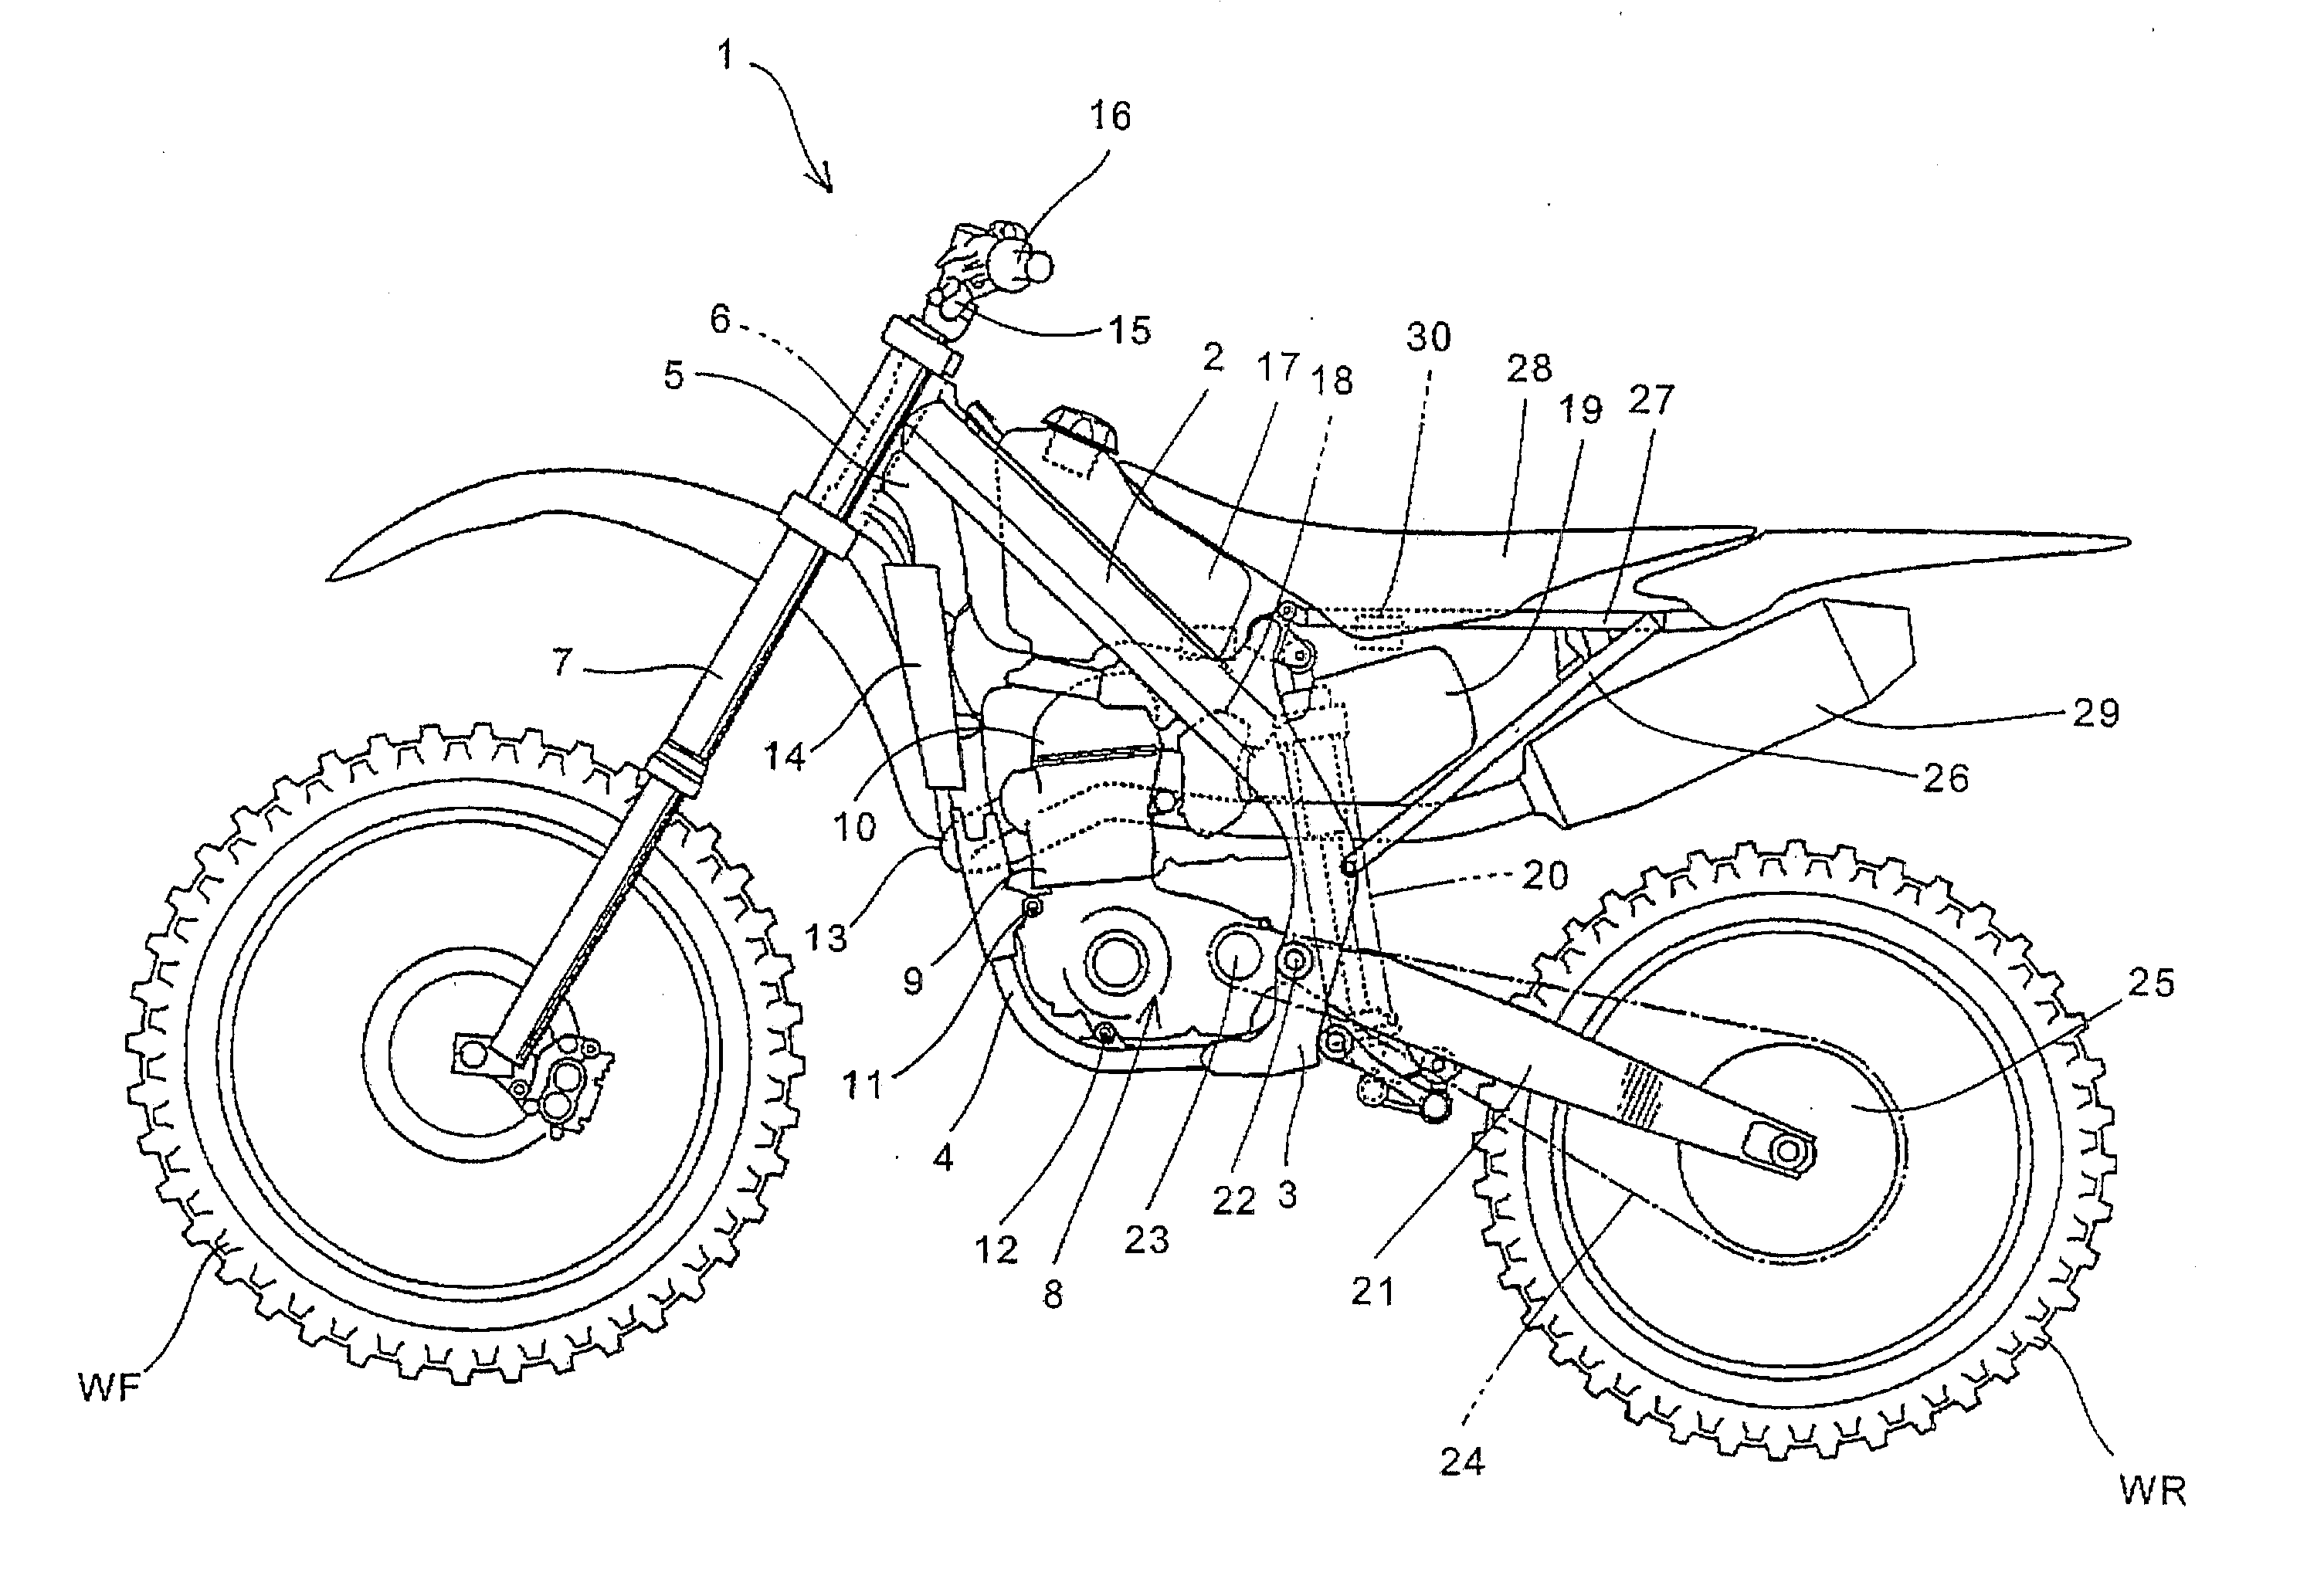 Reverse rotation preventive device for engine of motorcycle